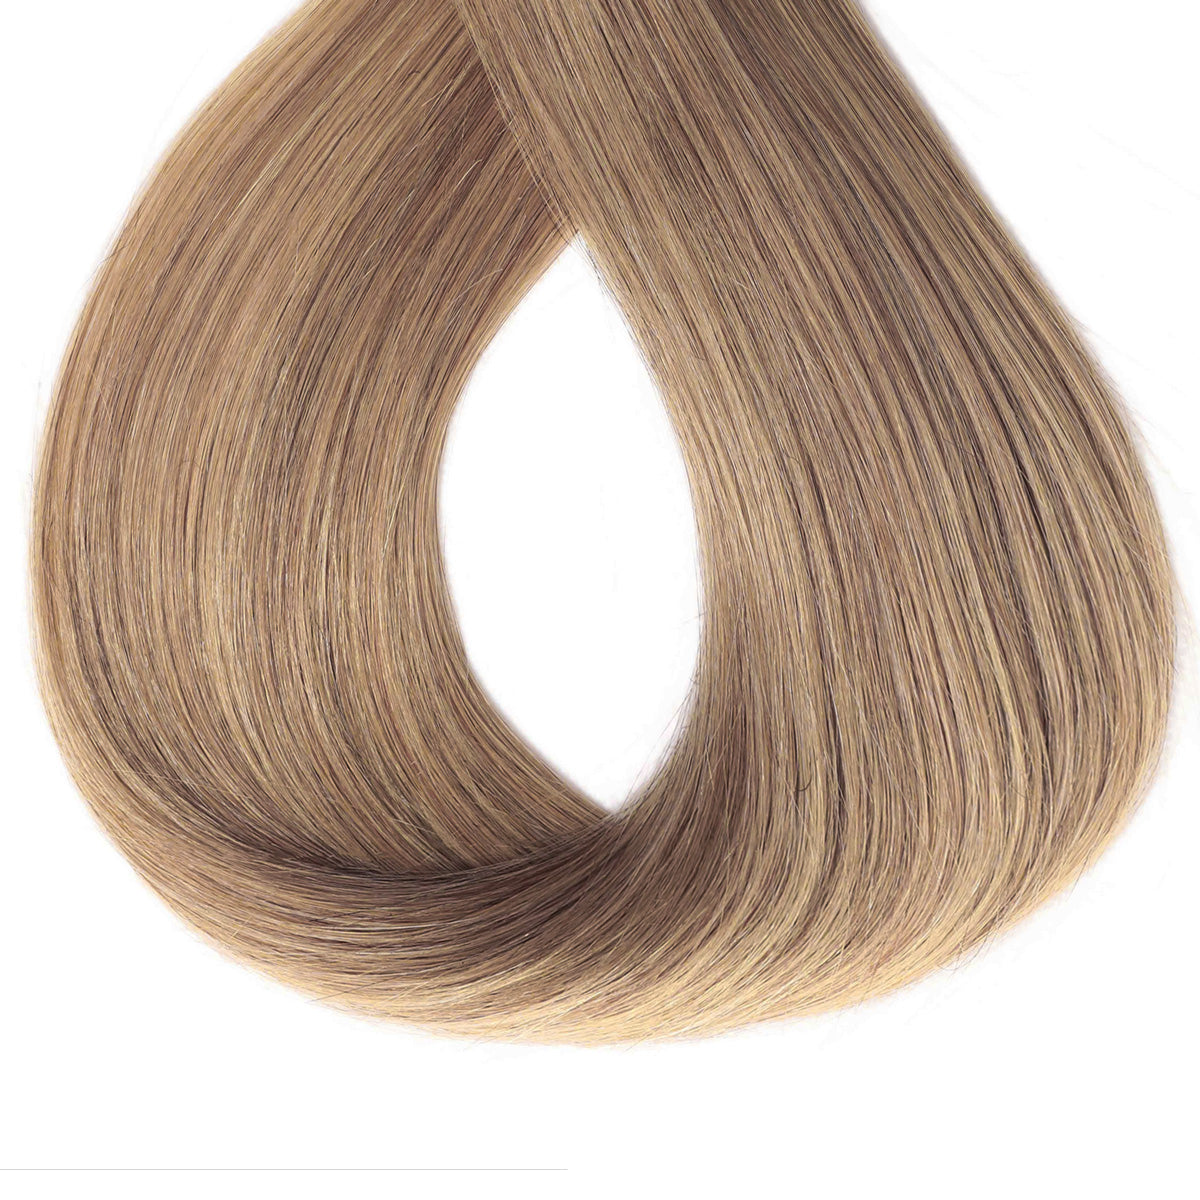 Hair Extensions online Sydney perfect color match